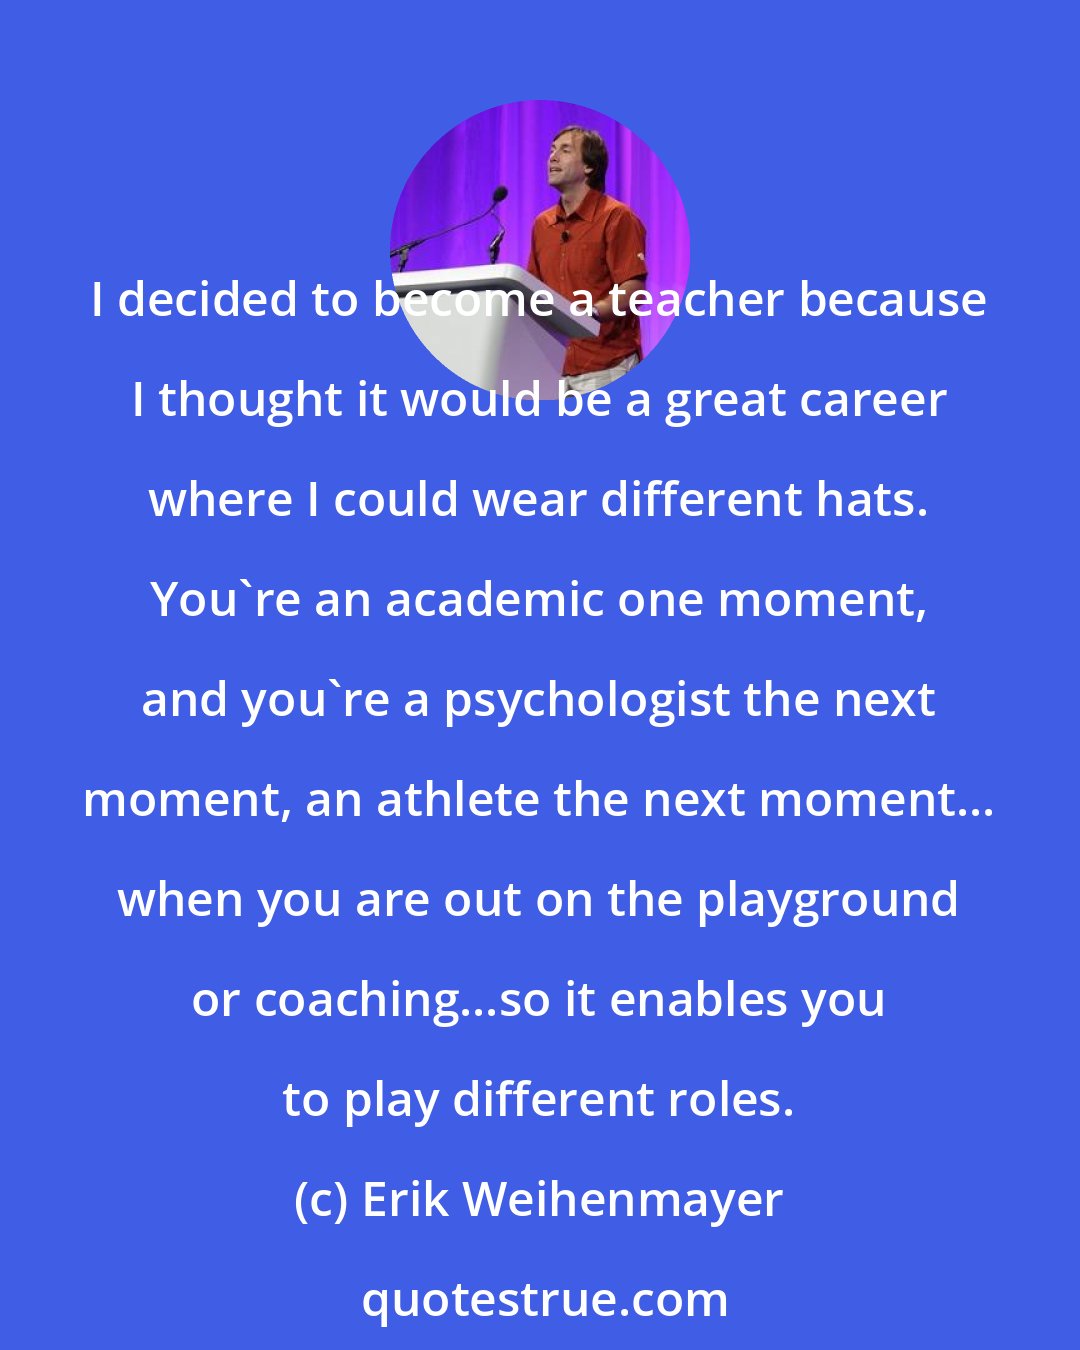 Erik Weihenmayer: I decided to become a teacher because I thought it would be a great career where I could wear different hats. You're an academic one moment, and you're a psychologist the next moment, an athlete the next moment... when you are out on the playground or coaching...so it enables you to play different roles.